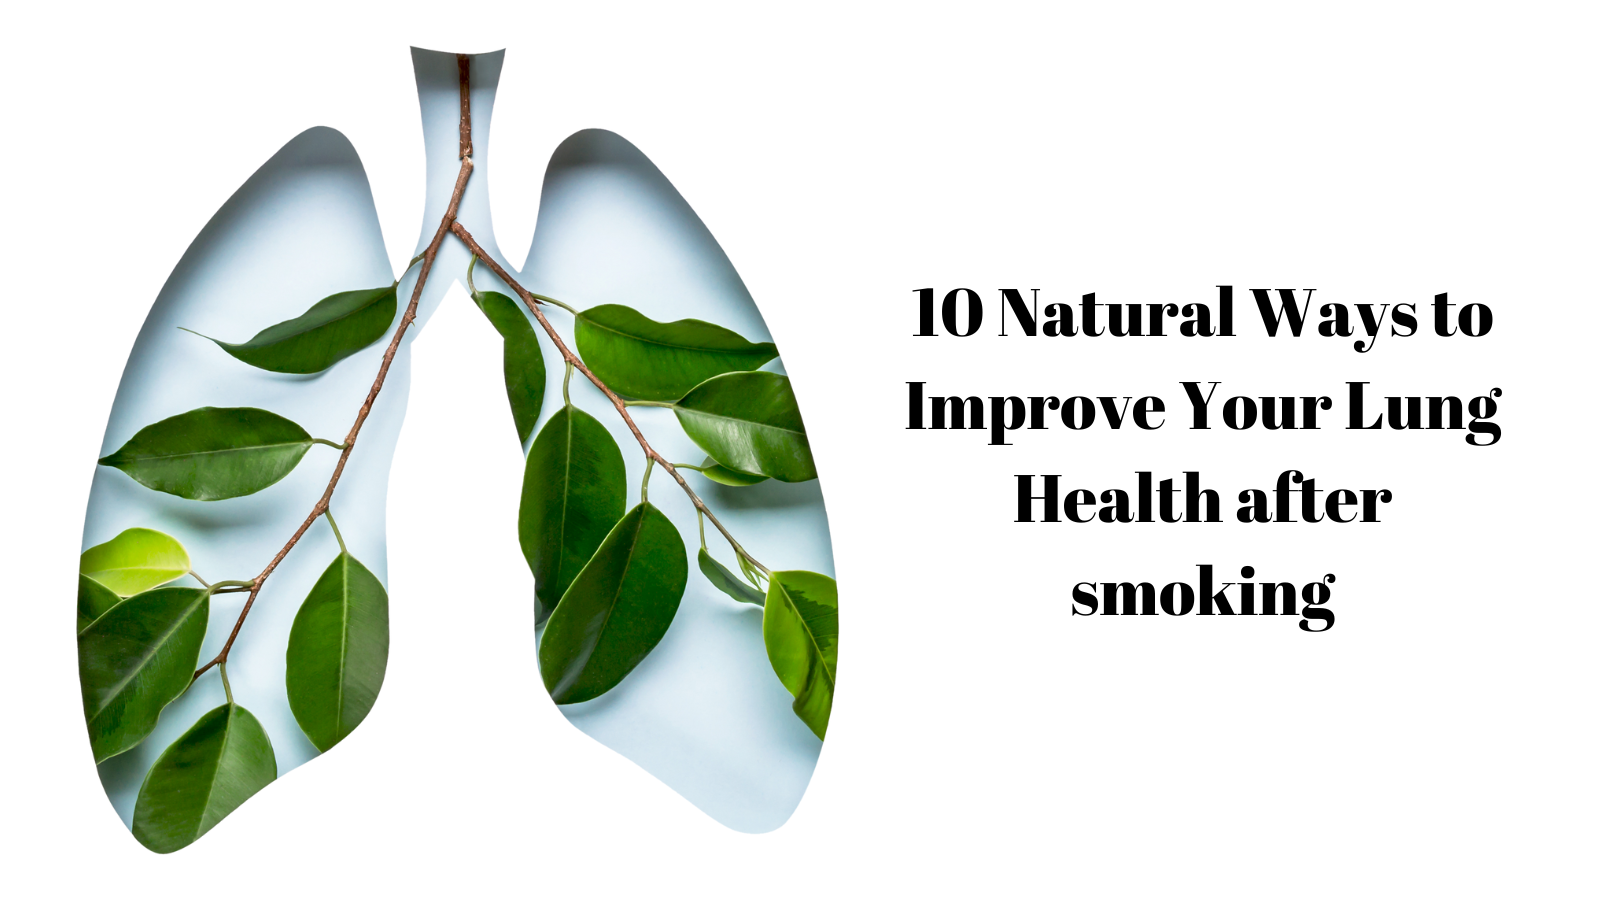 10 Natural Ways to Improve Your Lung Health after smoking